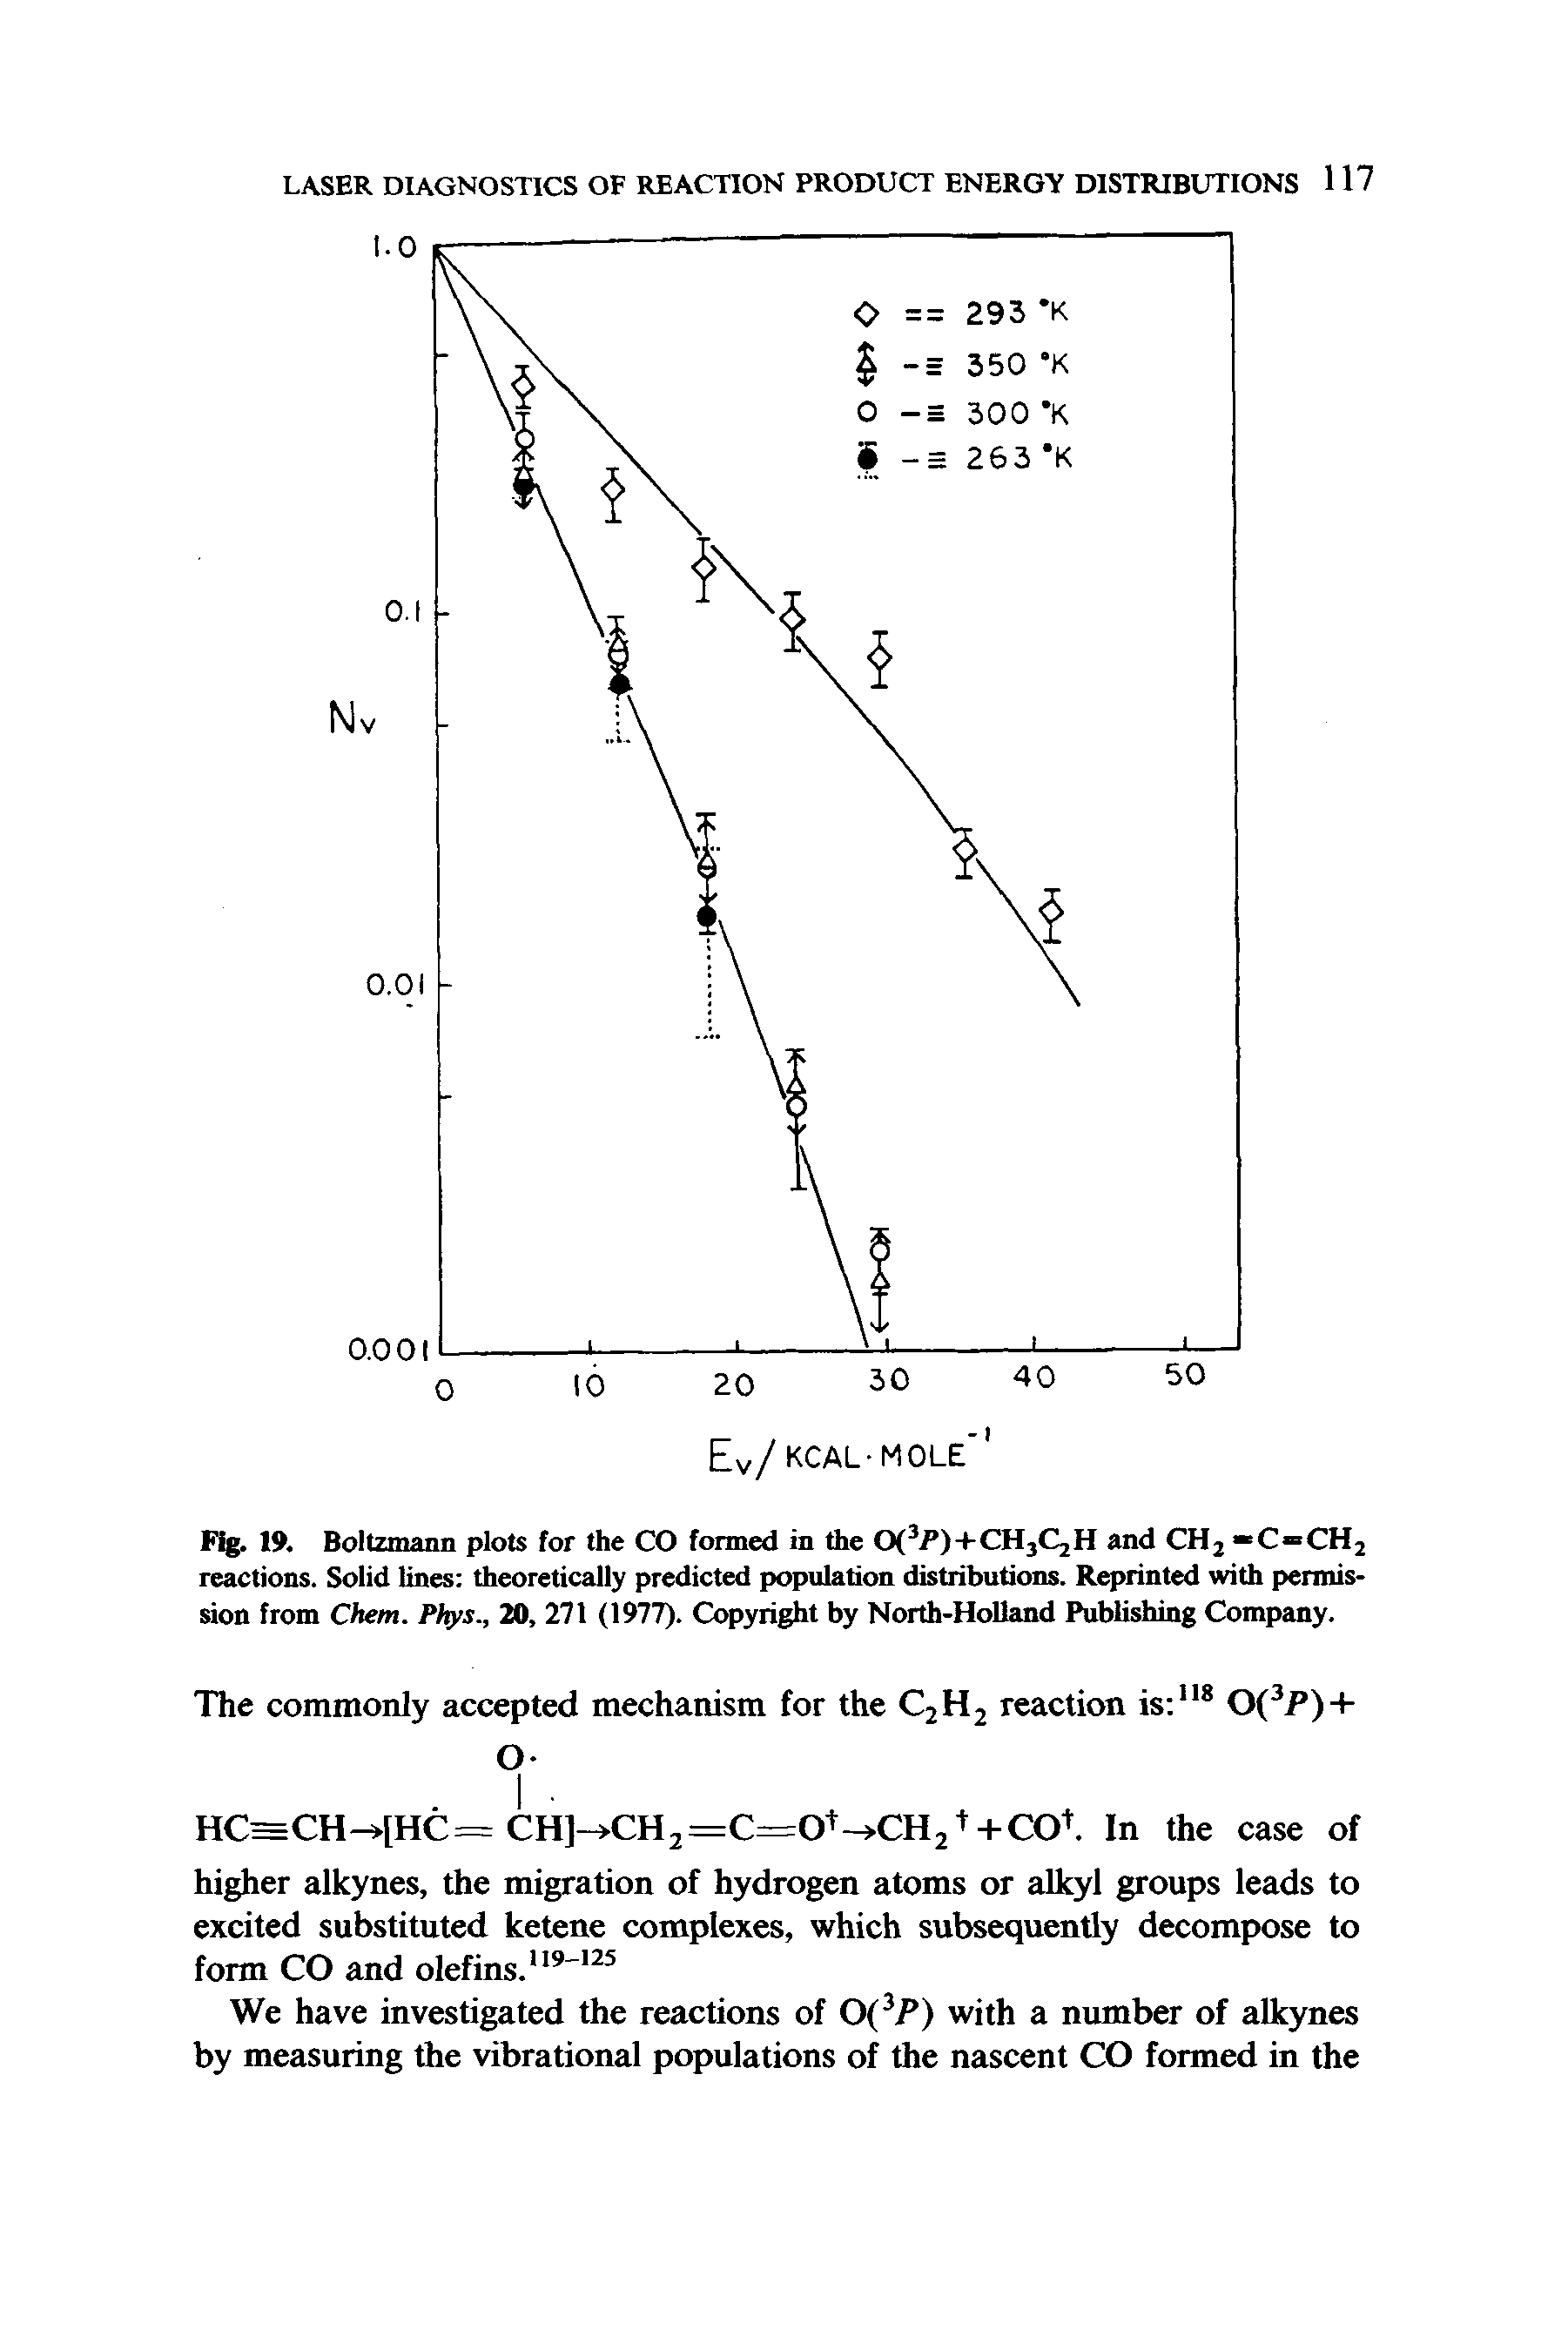 Fig. 19. Boltzmann plots for the CO formed in the 0( / )+CH3C2H and CH2 C=CH2 reactions. Solid lines theoretically predicted population distributions. Reprinted with permission from Chem. Phys., 20, 271 (1977). Copyright by North-Holland Publishing Company.